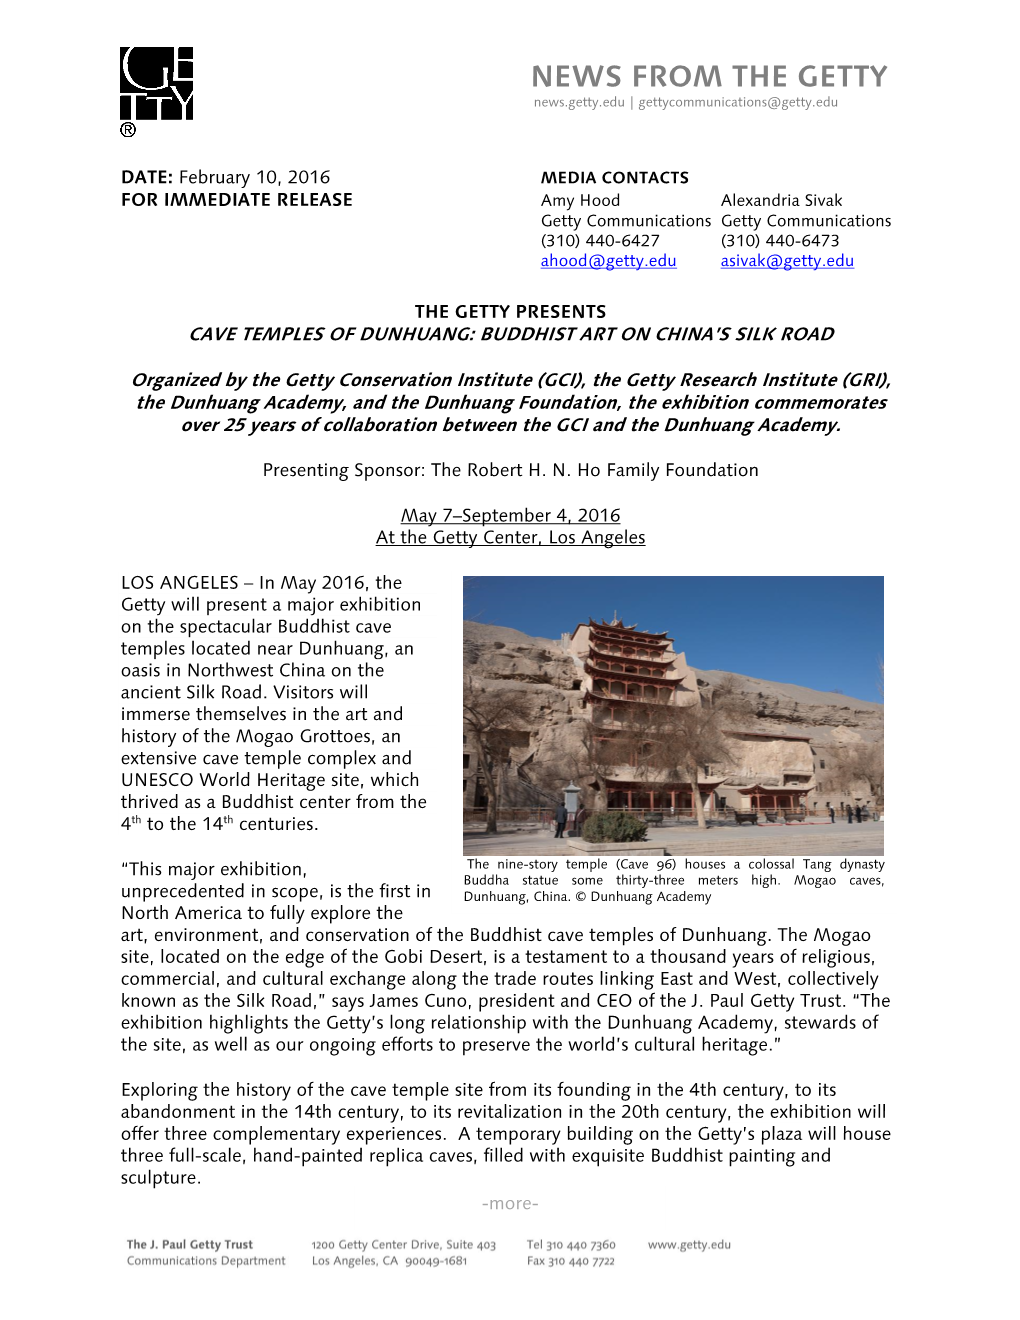 Cave Temples of Dunhuang: Buddhist Art on China’S Silk Road